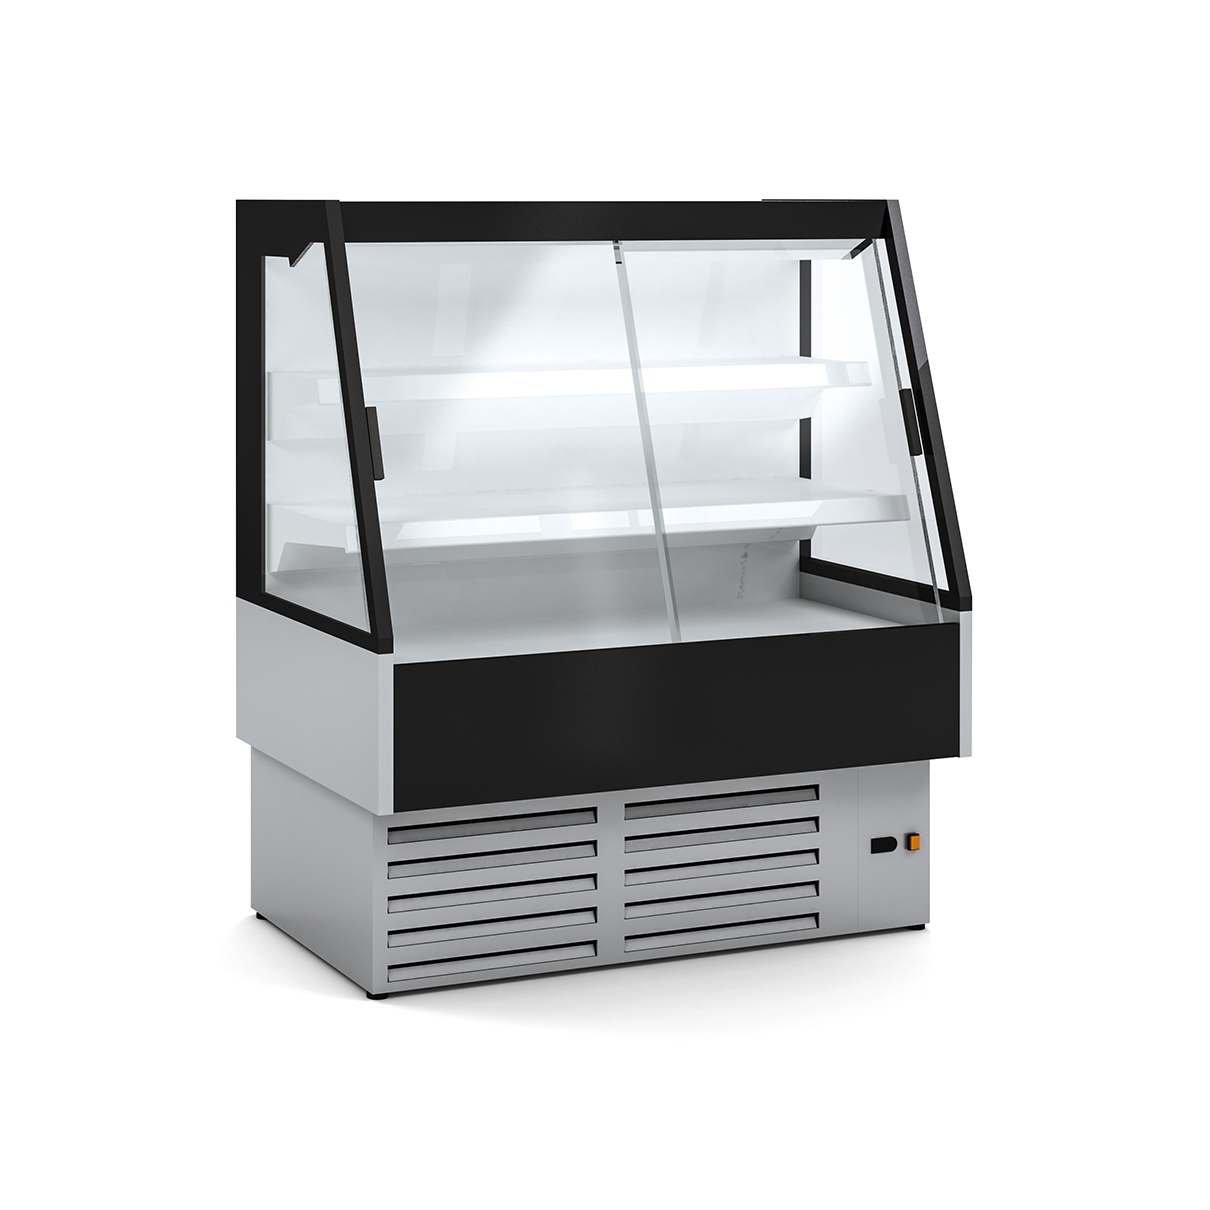 REFRIGERATED WALL-MOUNTED DISPLAY CABINET SVG1 M1